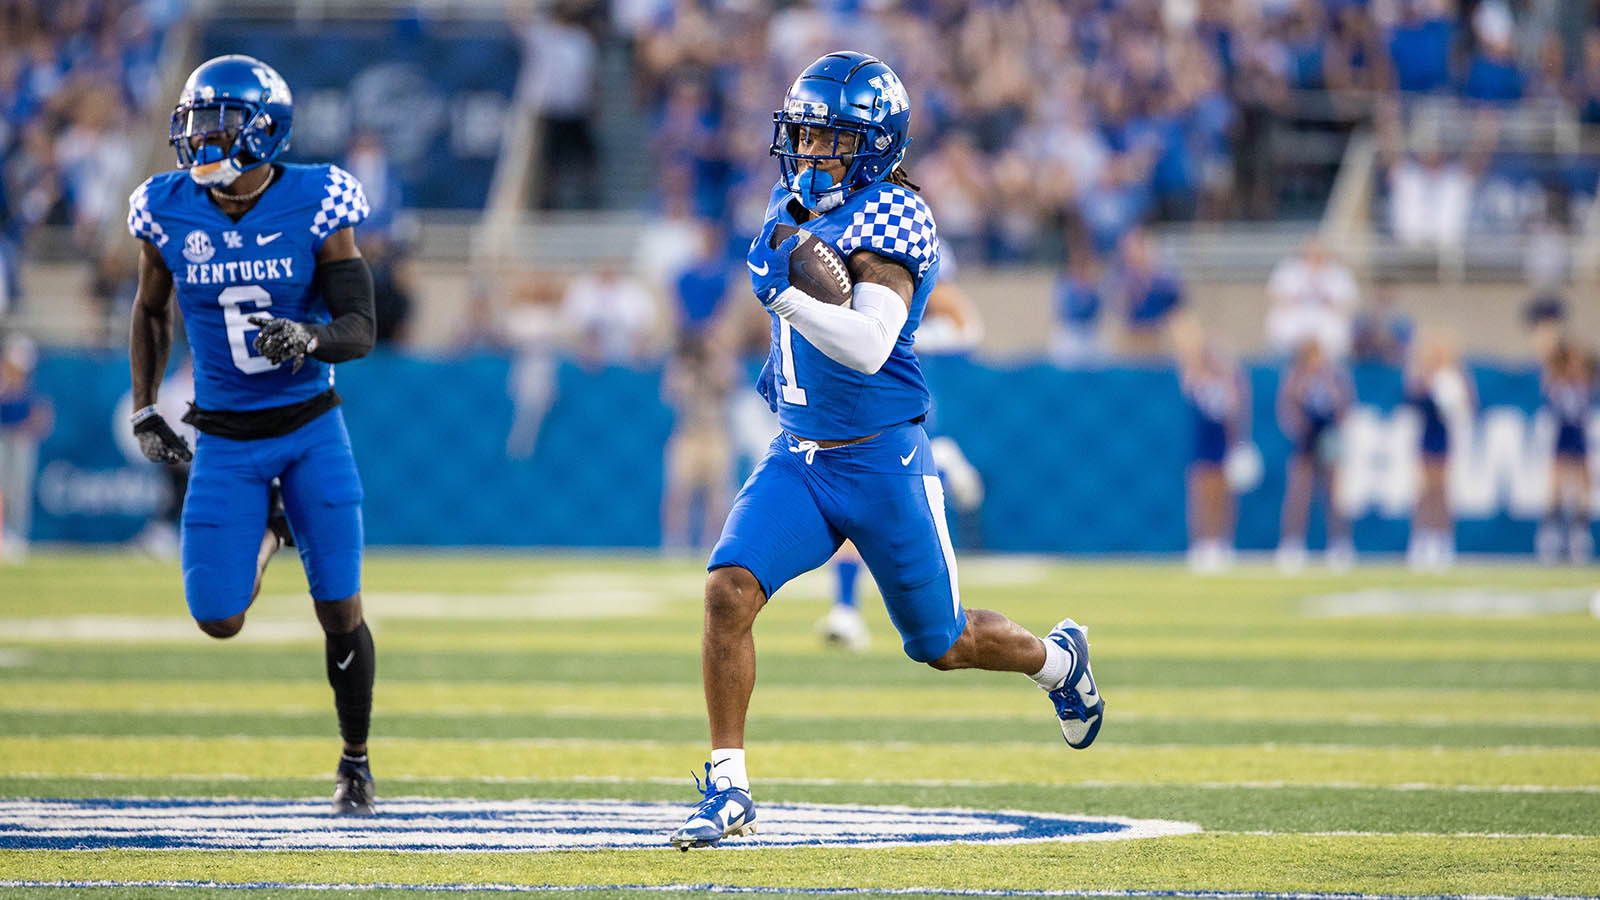 Kentucky Offense Hoping to Capitalize on Opportunities